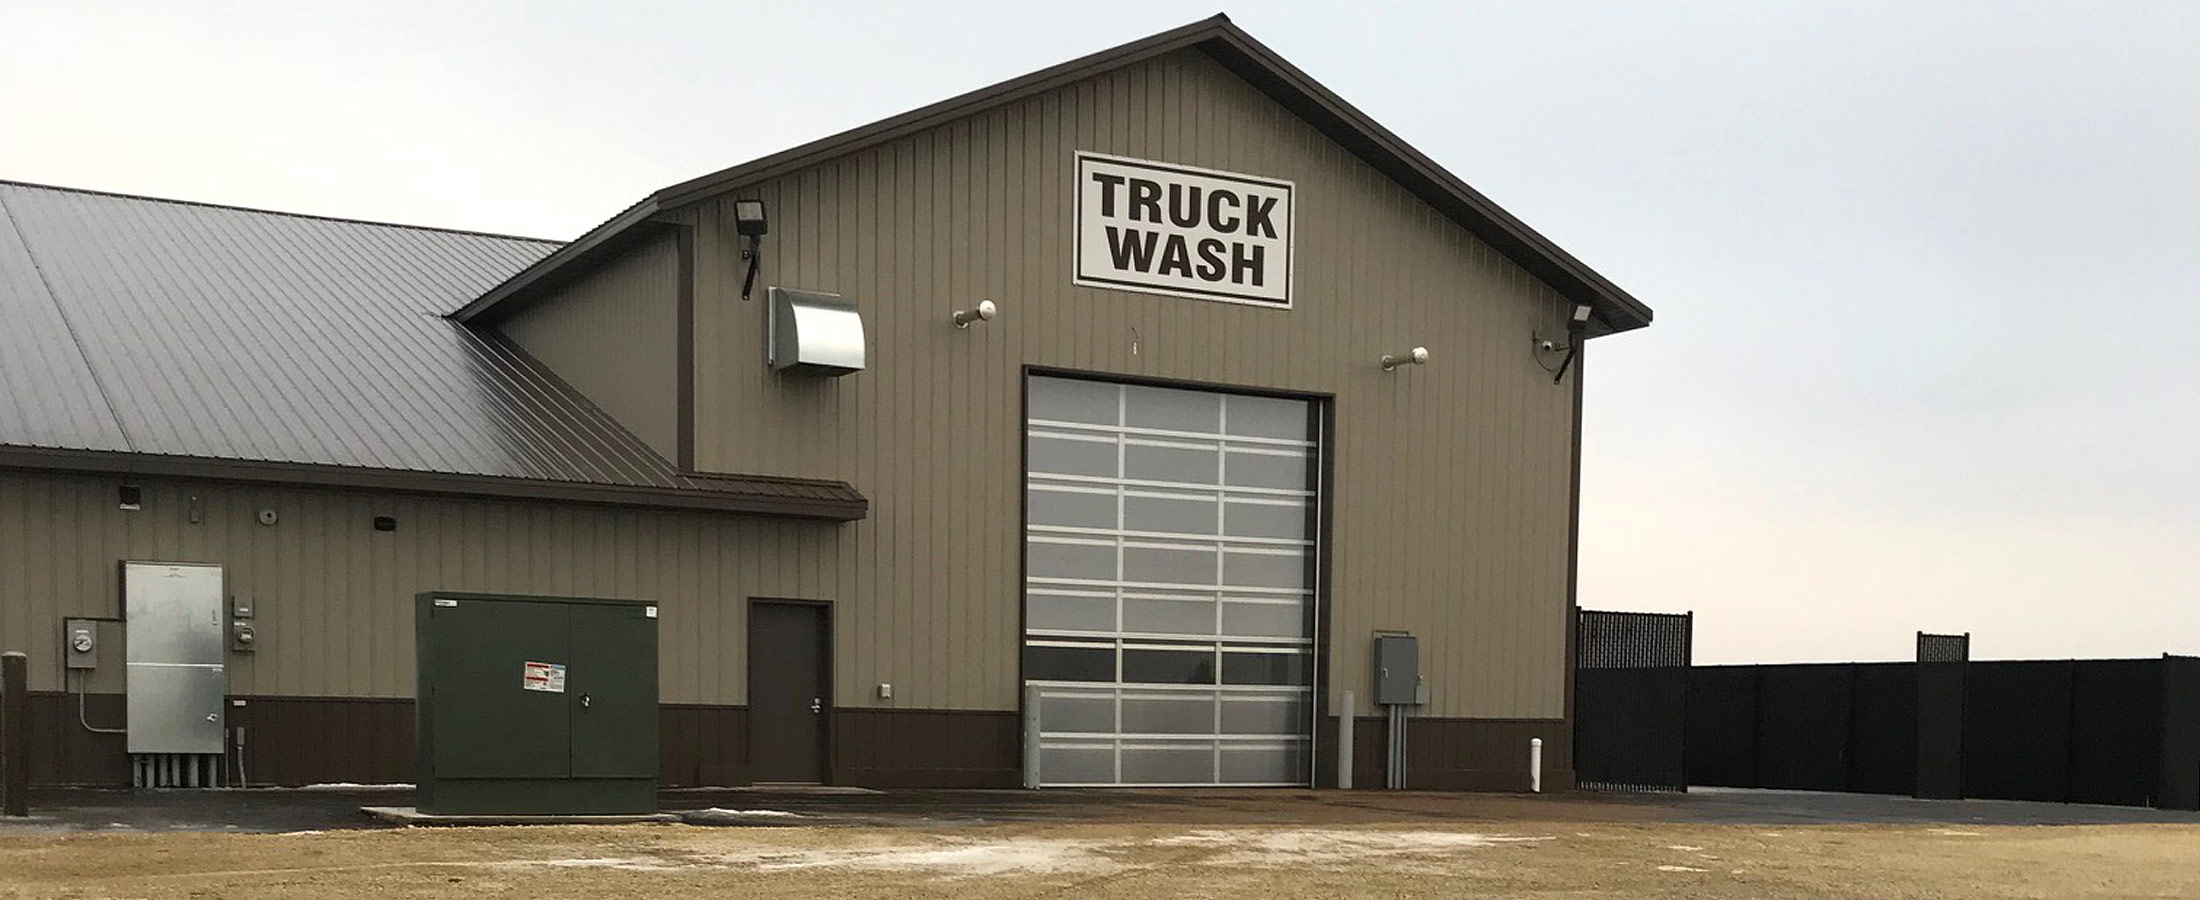 Exterior of Dubbels Truck Wash washing center in Randolph, MN